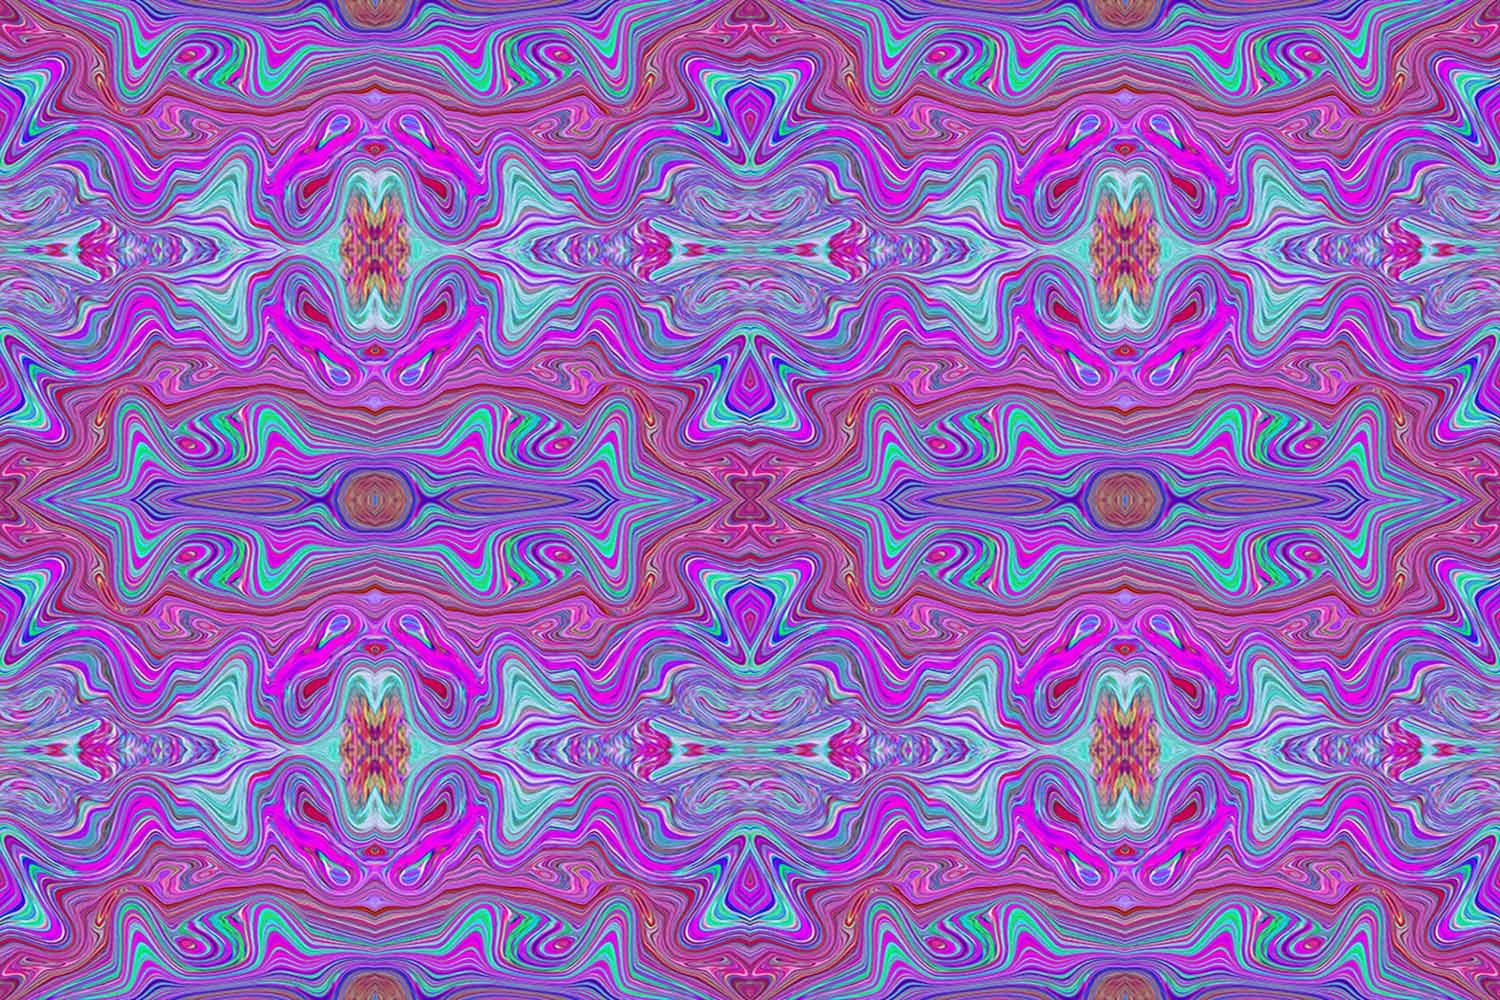 Wavy Magenta and Green Trippy Marbled Pattern